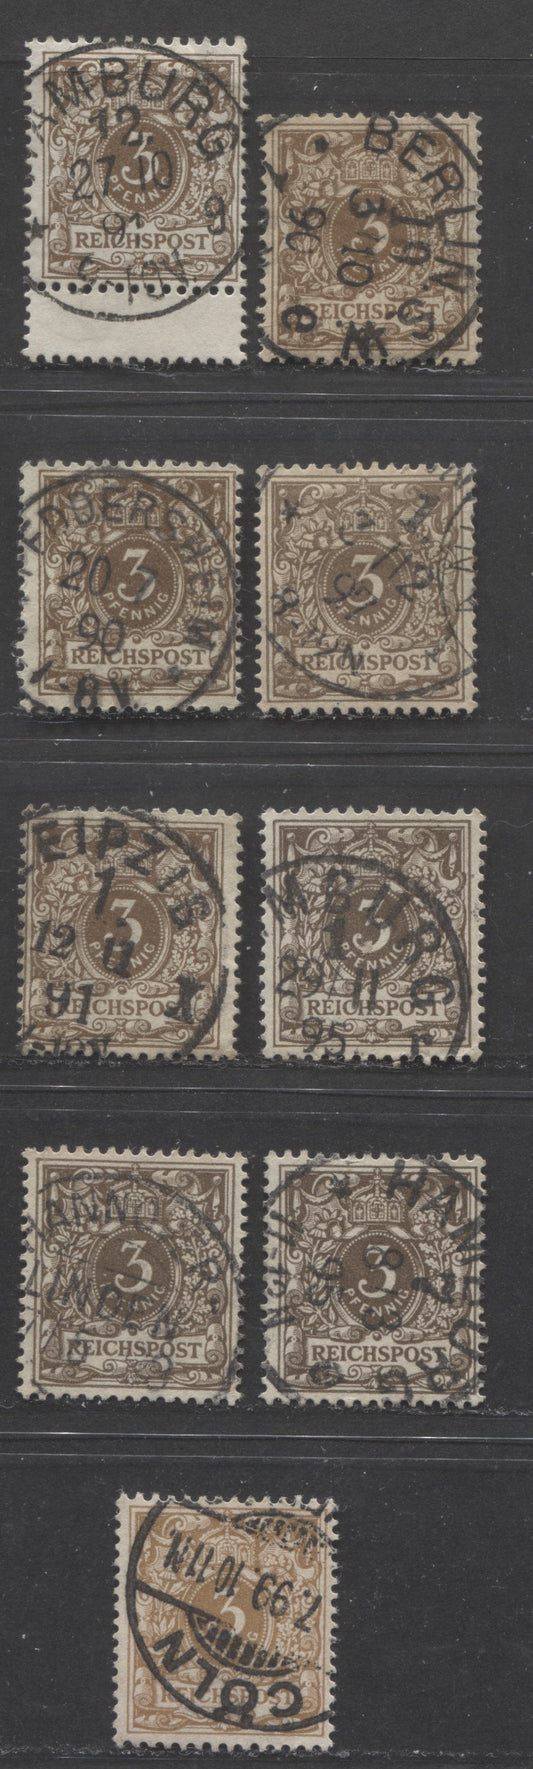 Lot 427 Germany SC#46 3pf Brown, Olive Brown & Yellow Brown 1889-1900 Numeral & Eagle Issue, All With SON Town Cancels, 9 Fine & VF Used Singles, Click on Listing to See ALL Pictures, Estimated Value $15